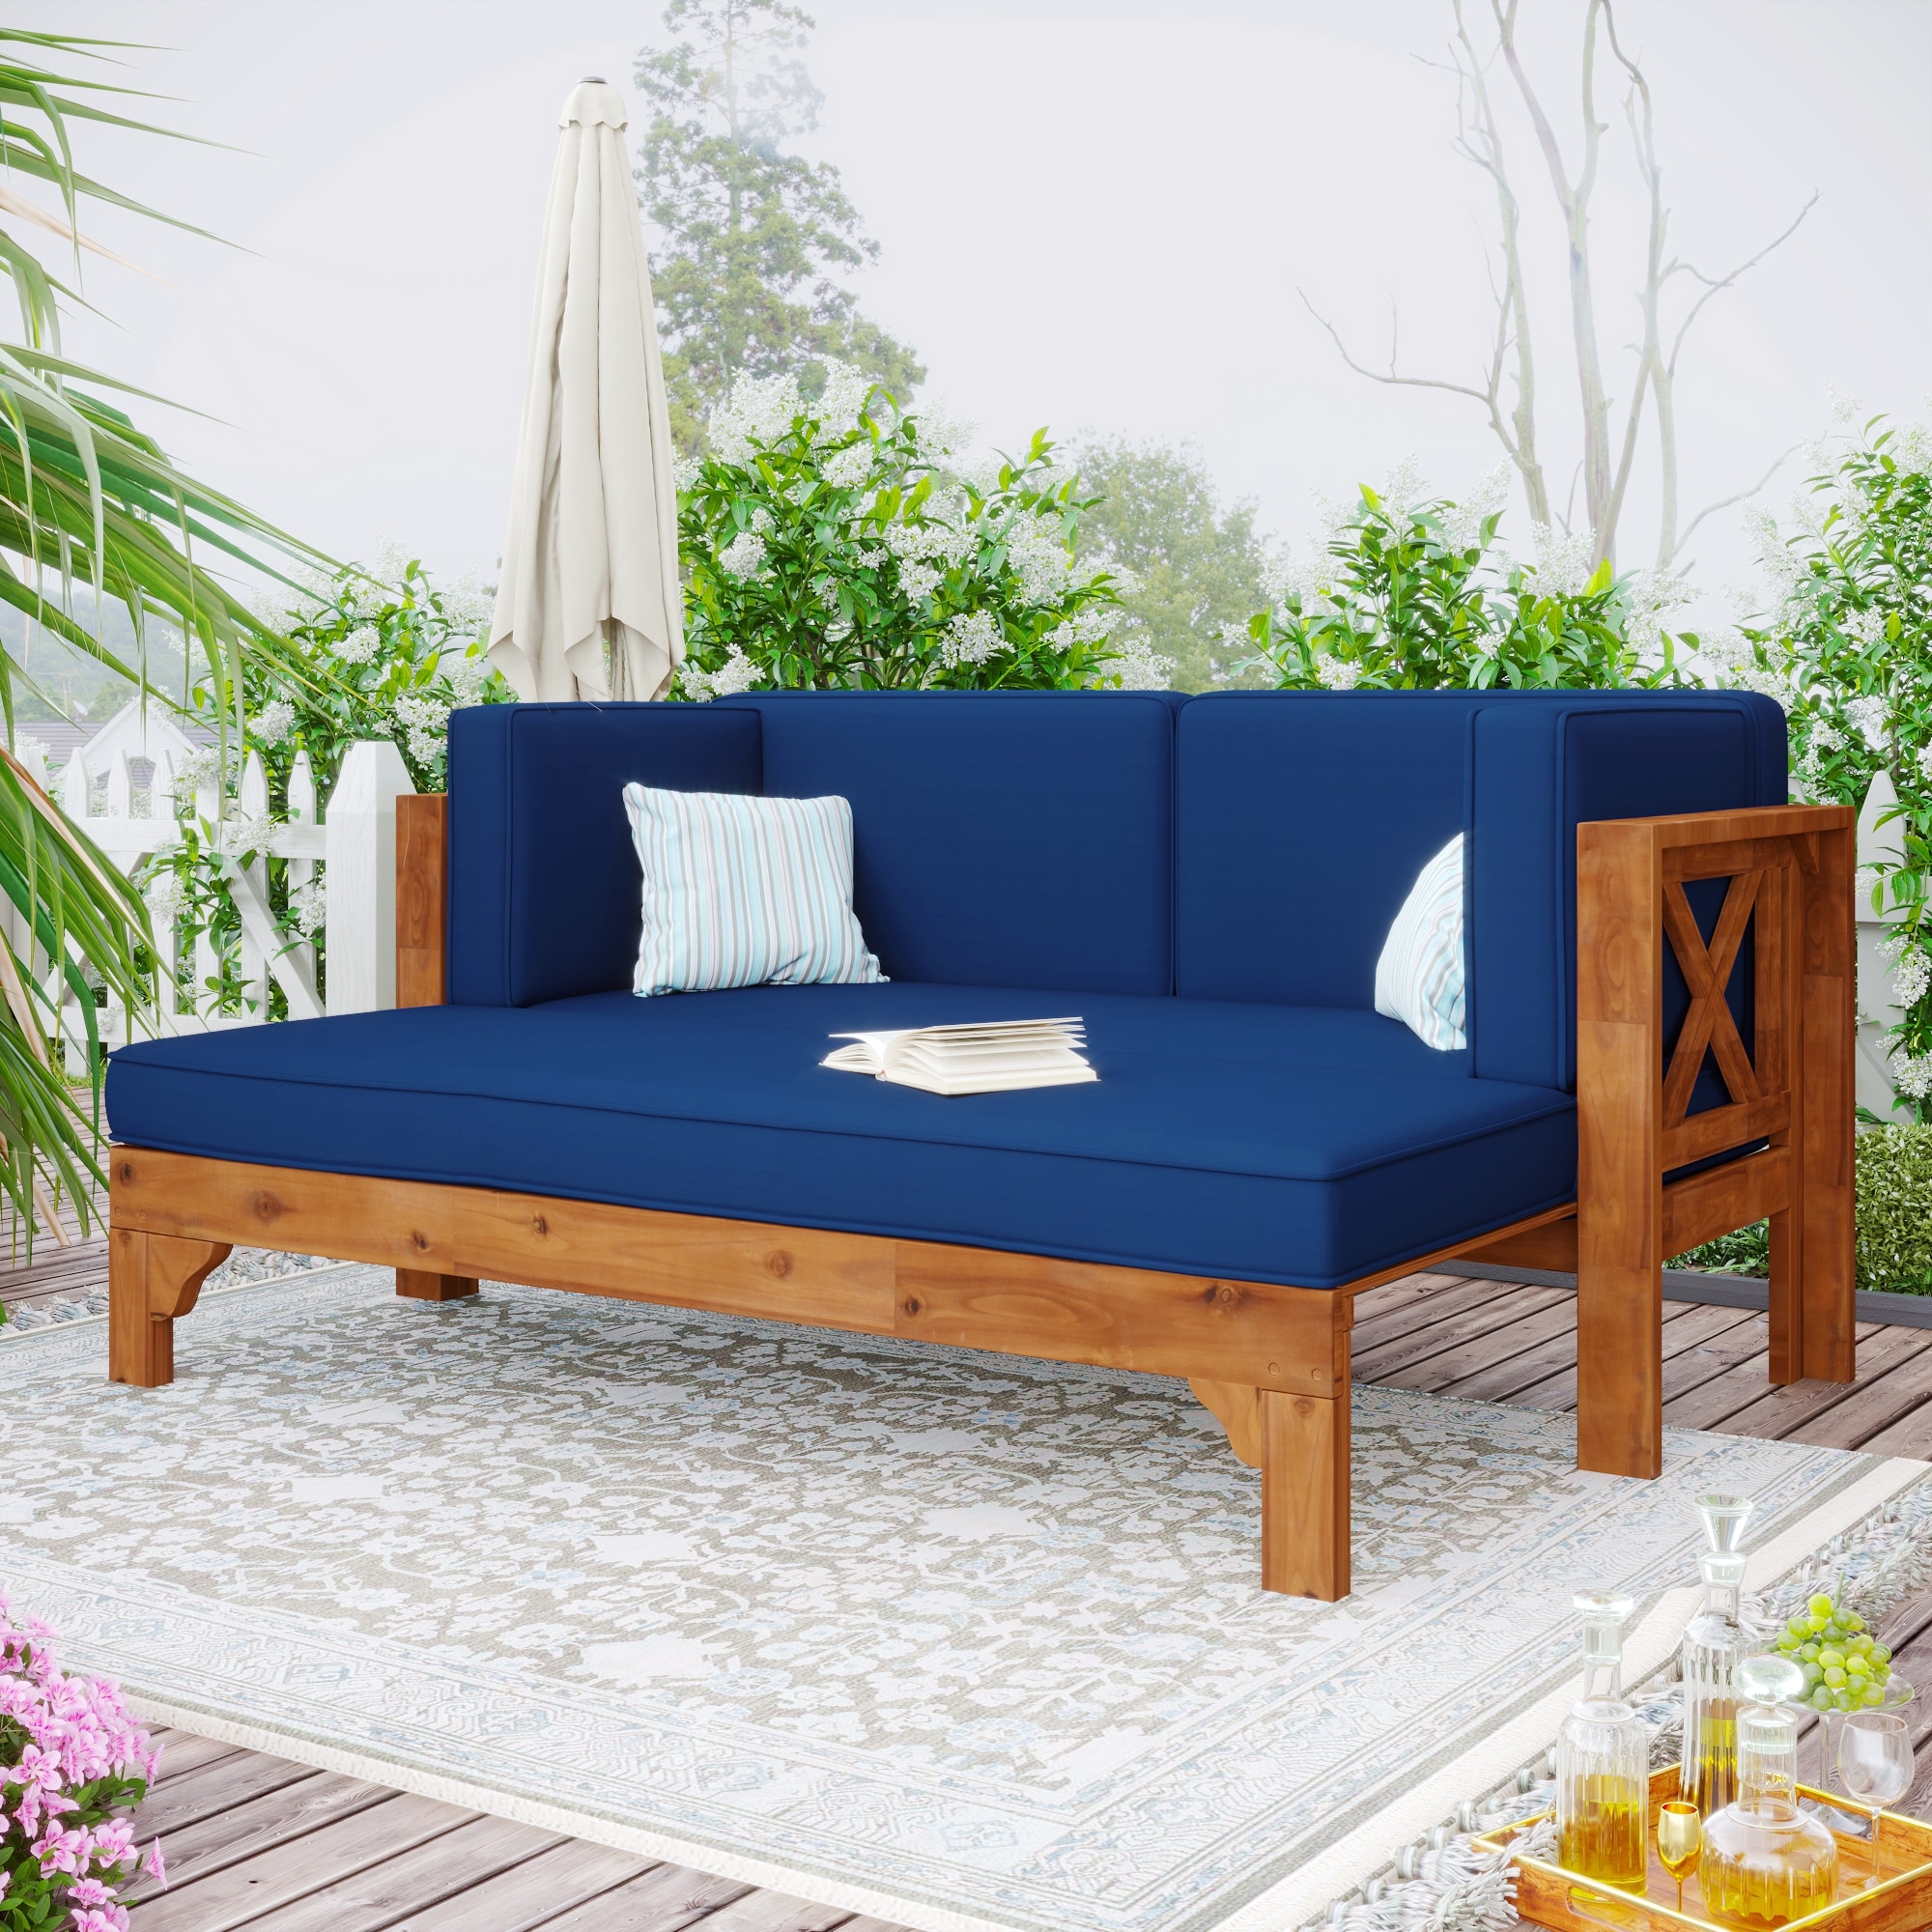 Outdoor Wood Sectional Furniture Set With Blue Cushions